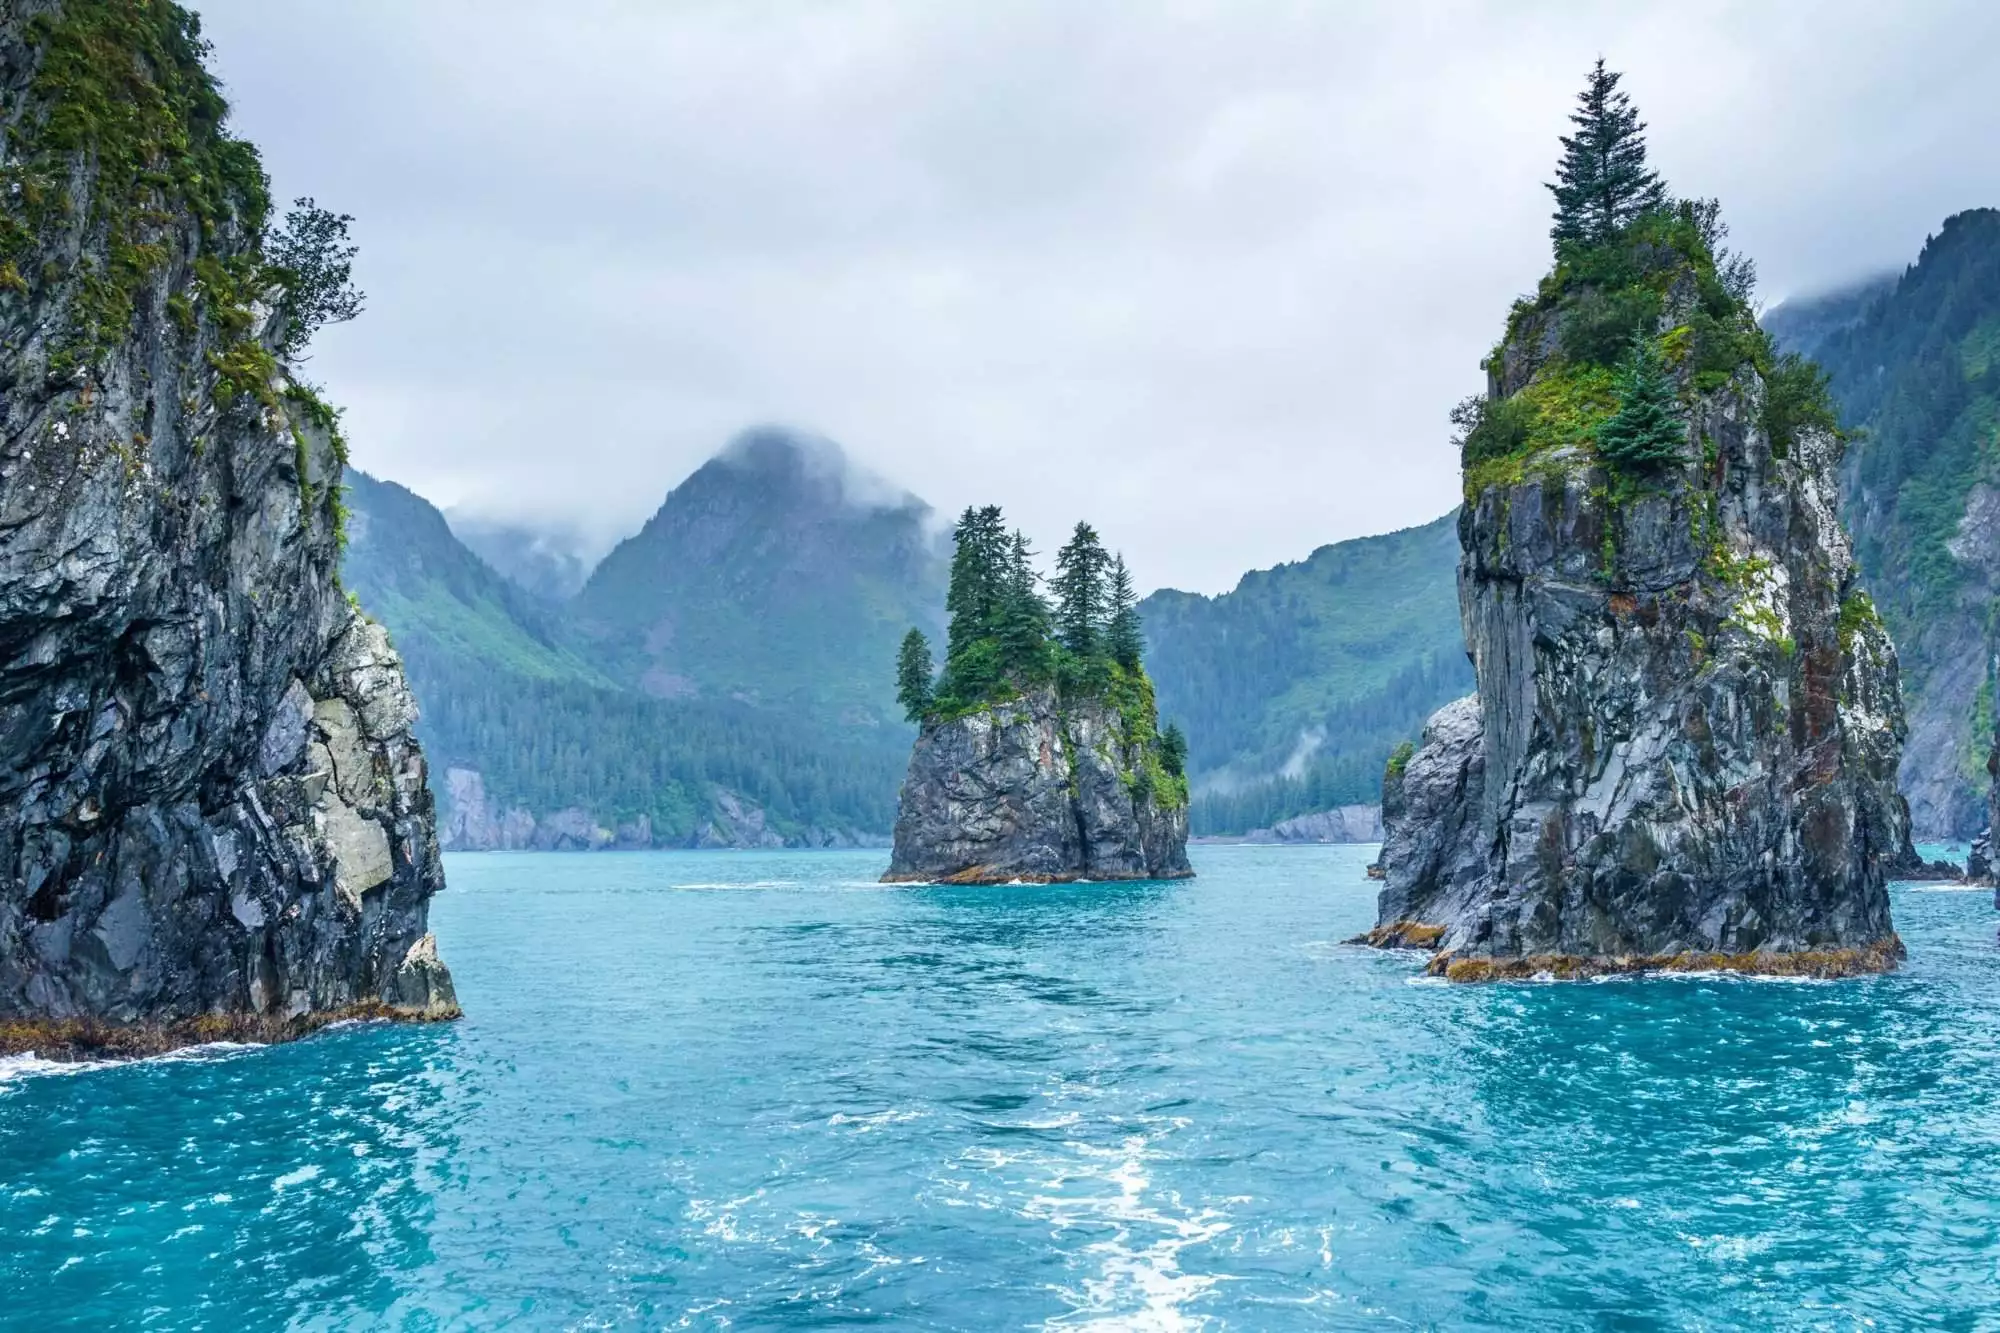 Alaska Tourism - 8 Best Places to See! 7